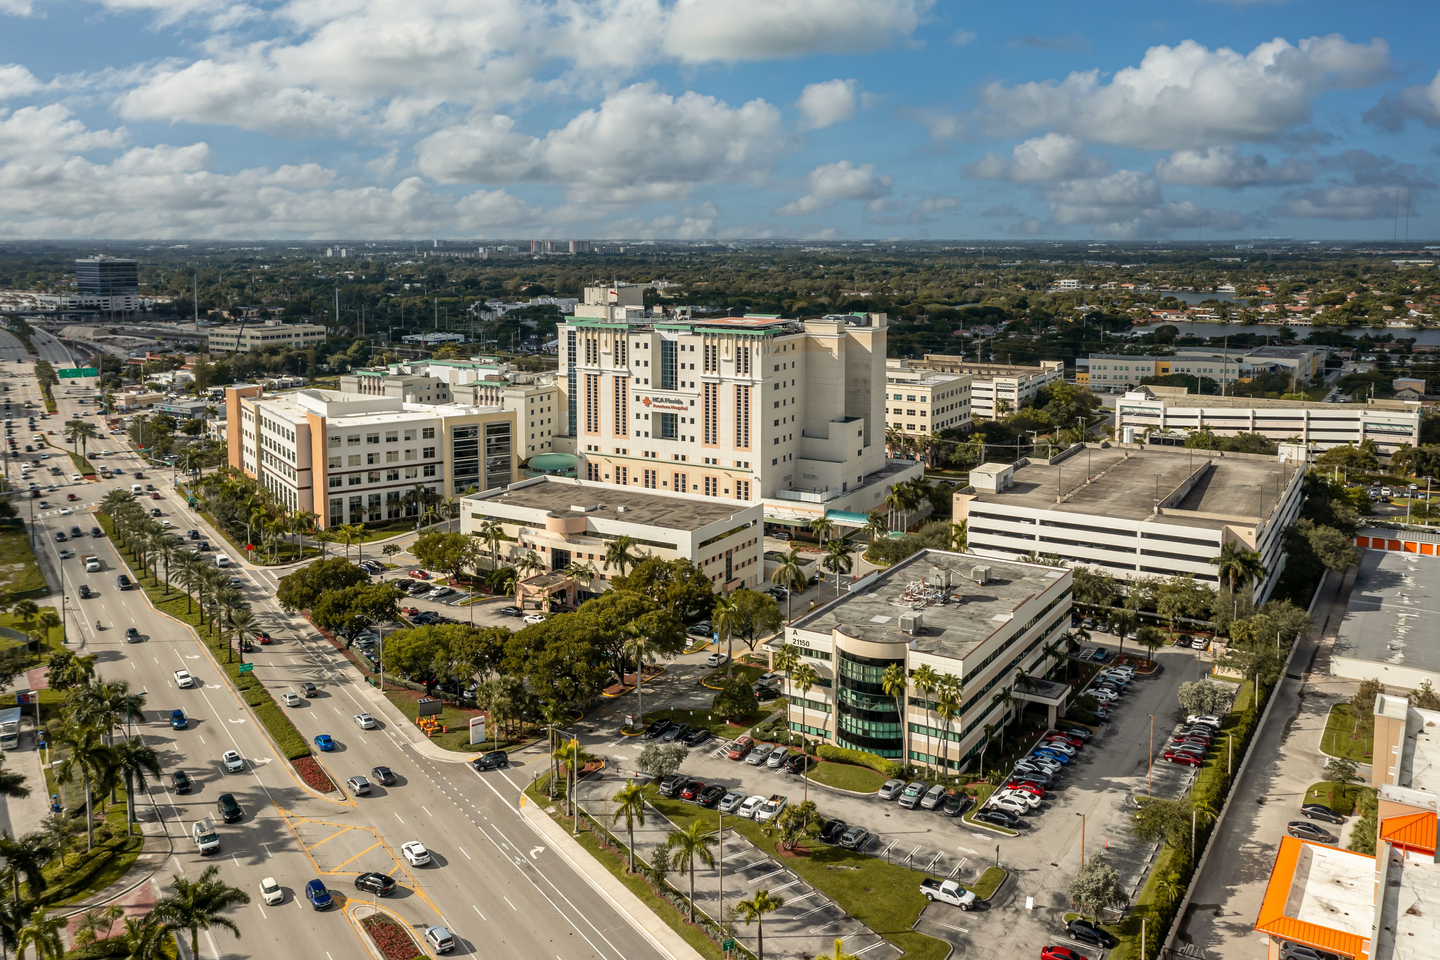 Exterior Building Photo of Aventura Hospital at Daytime wide angle distance